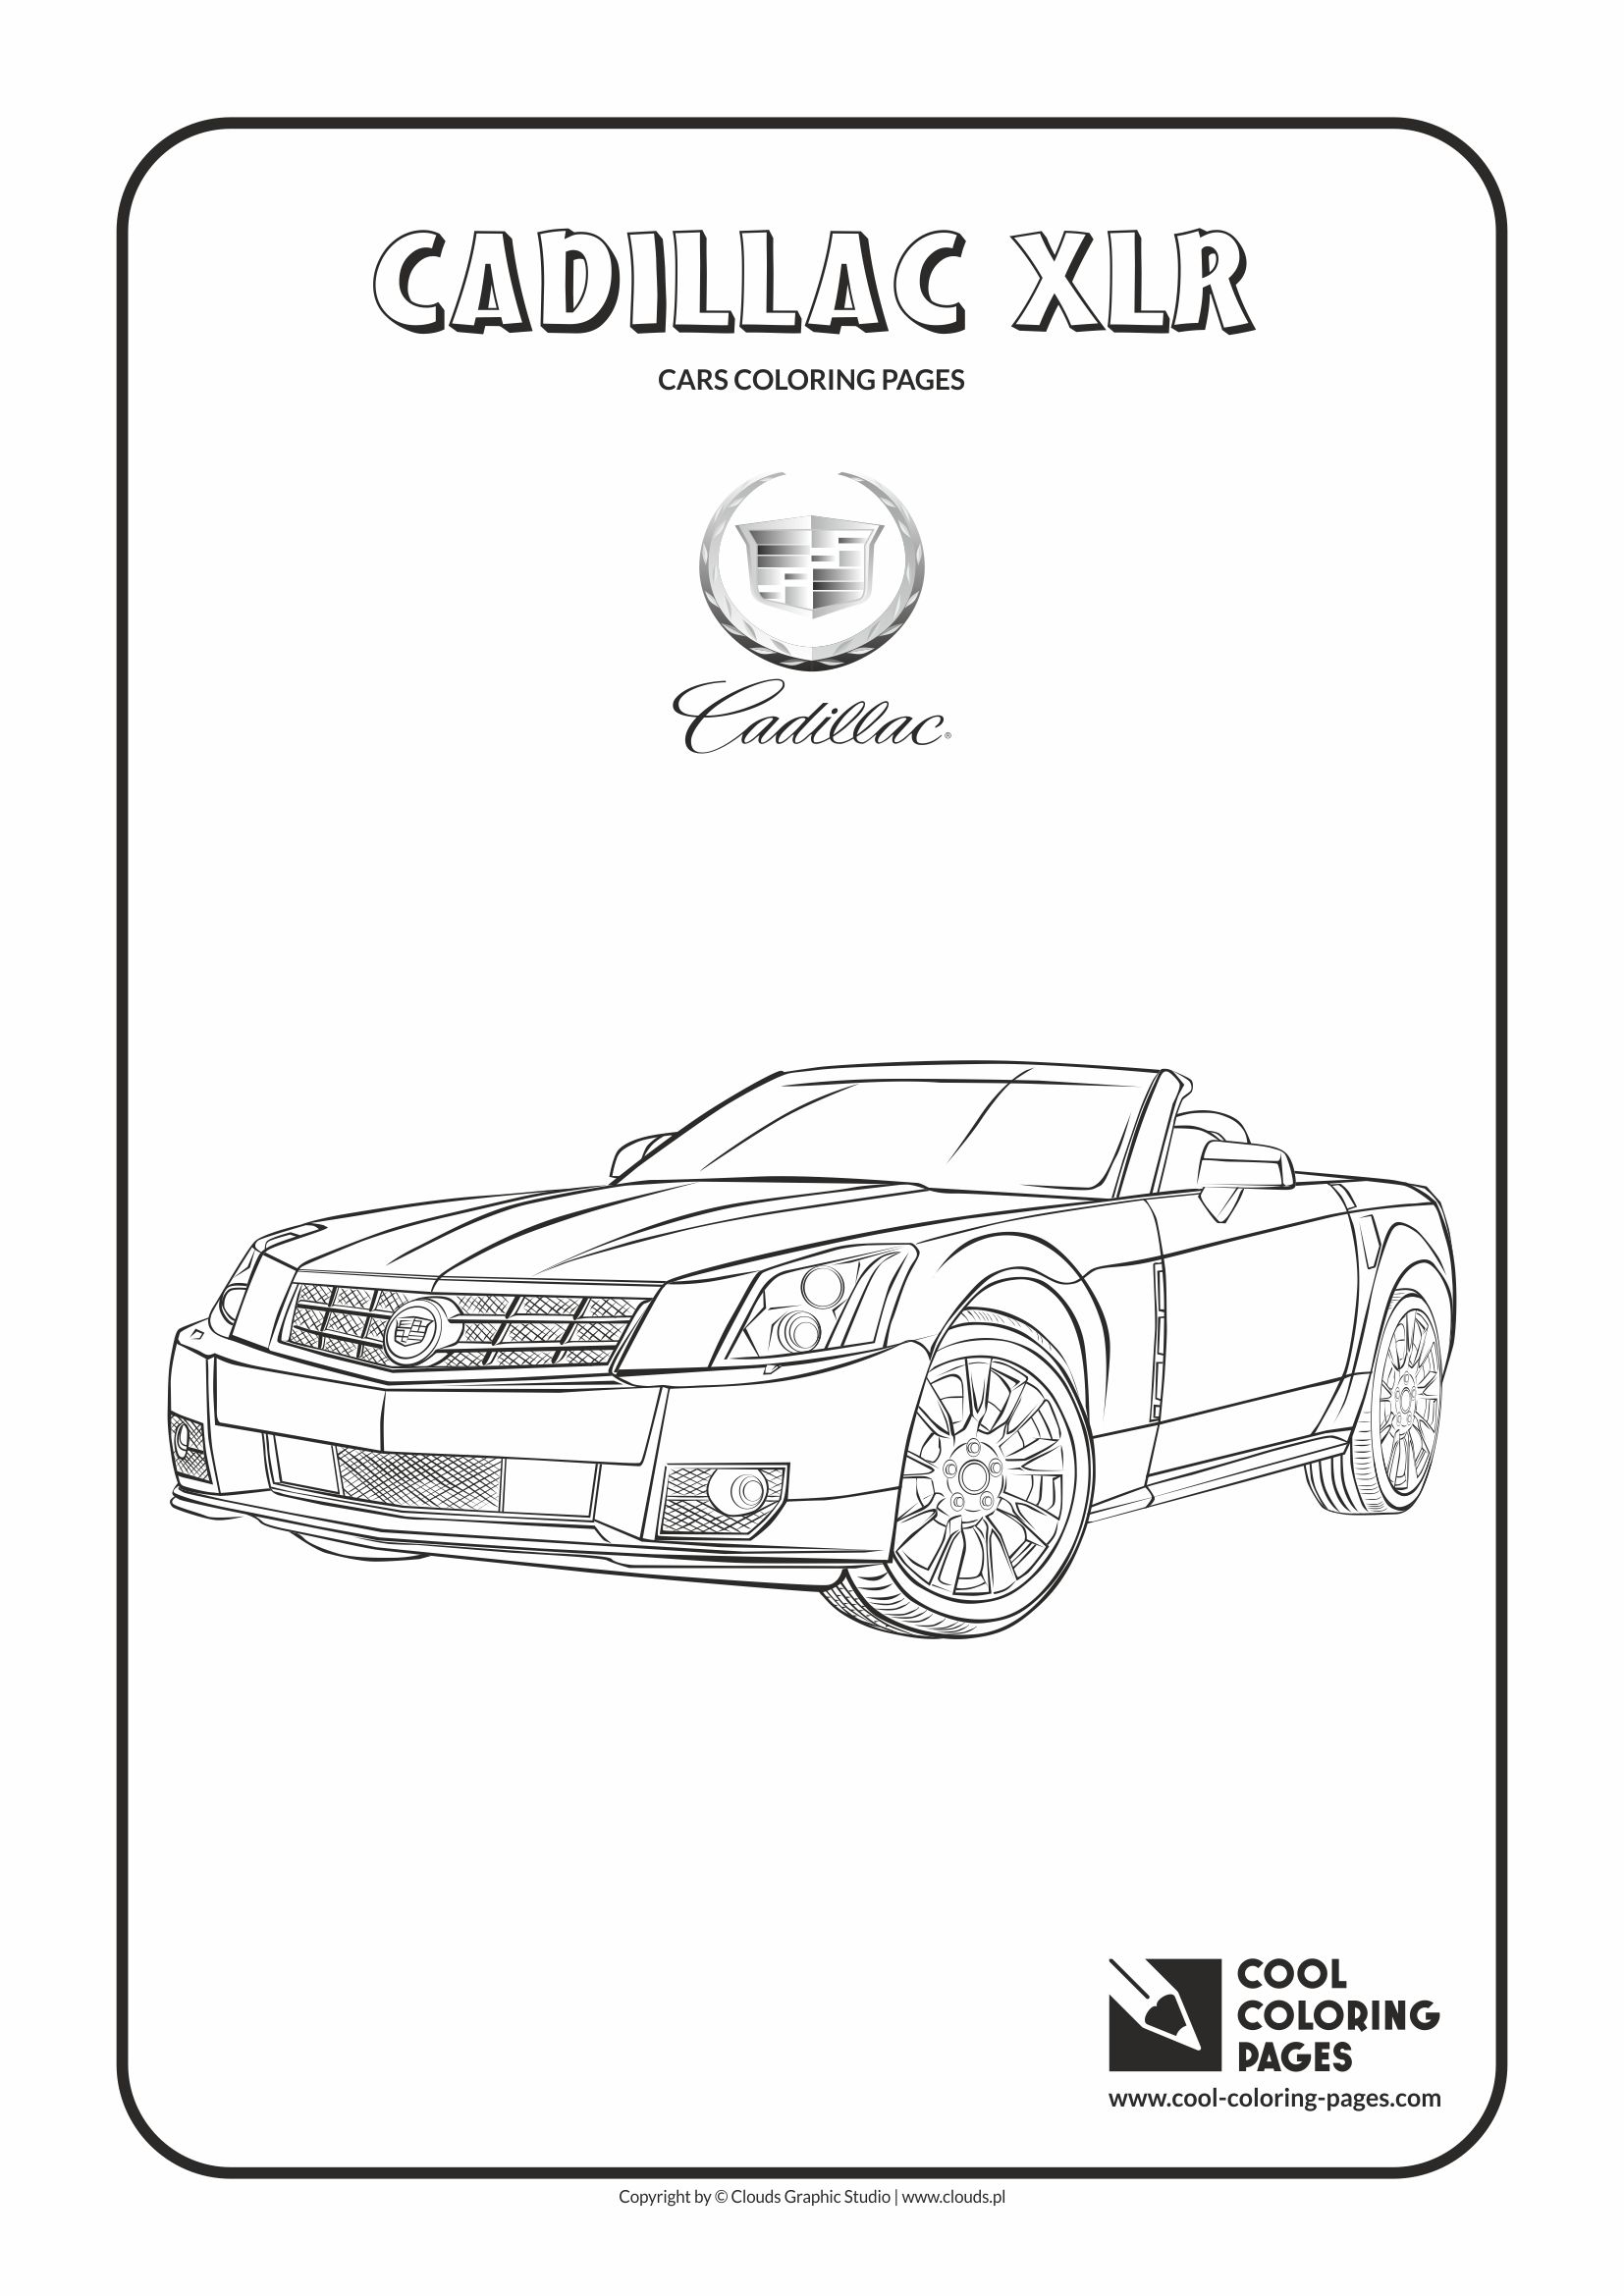 Cool Coloring Pages - Vehicles / Cadillac XLR / Coloring page with Cadillac XLR